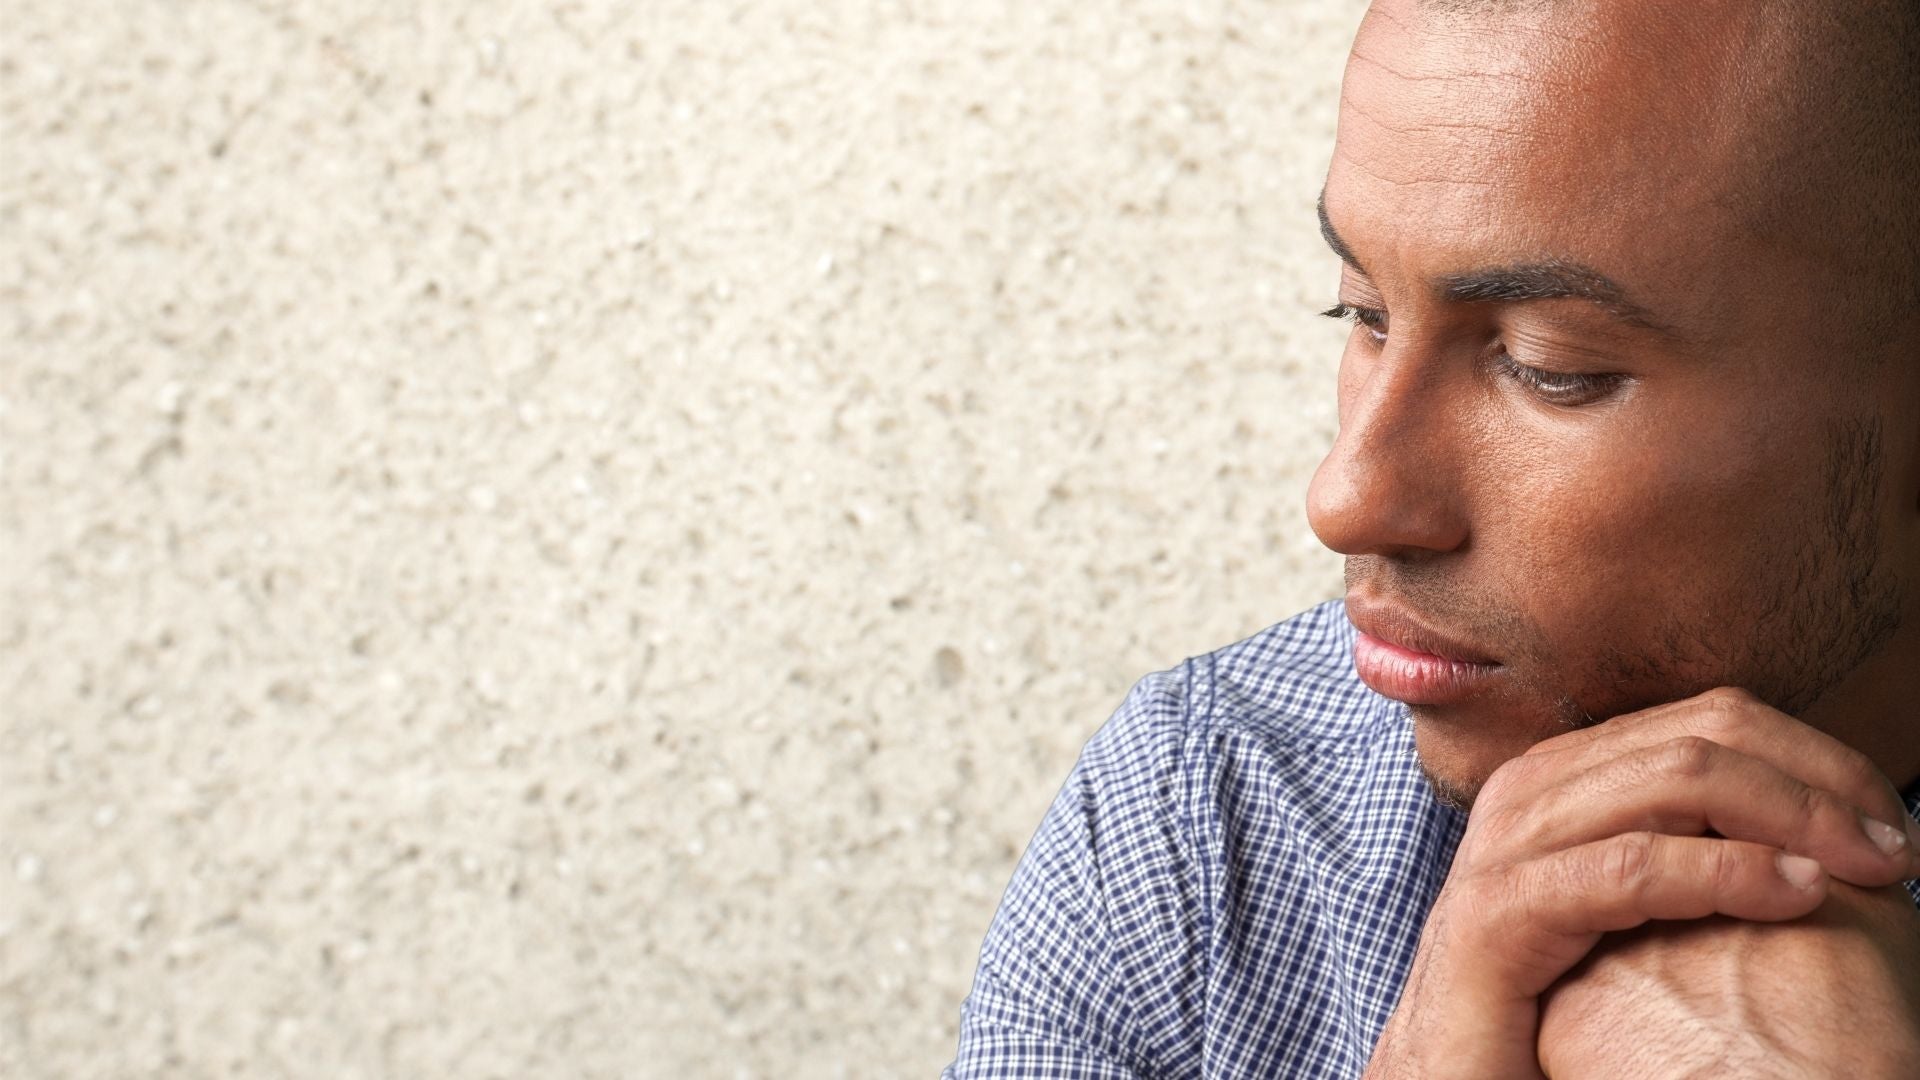 Men's Mental Health: 7 Ways To Manage Your Depression